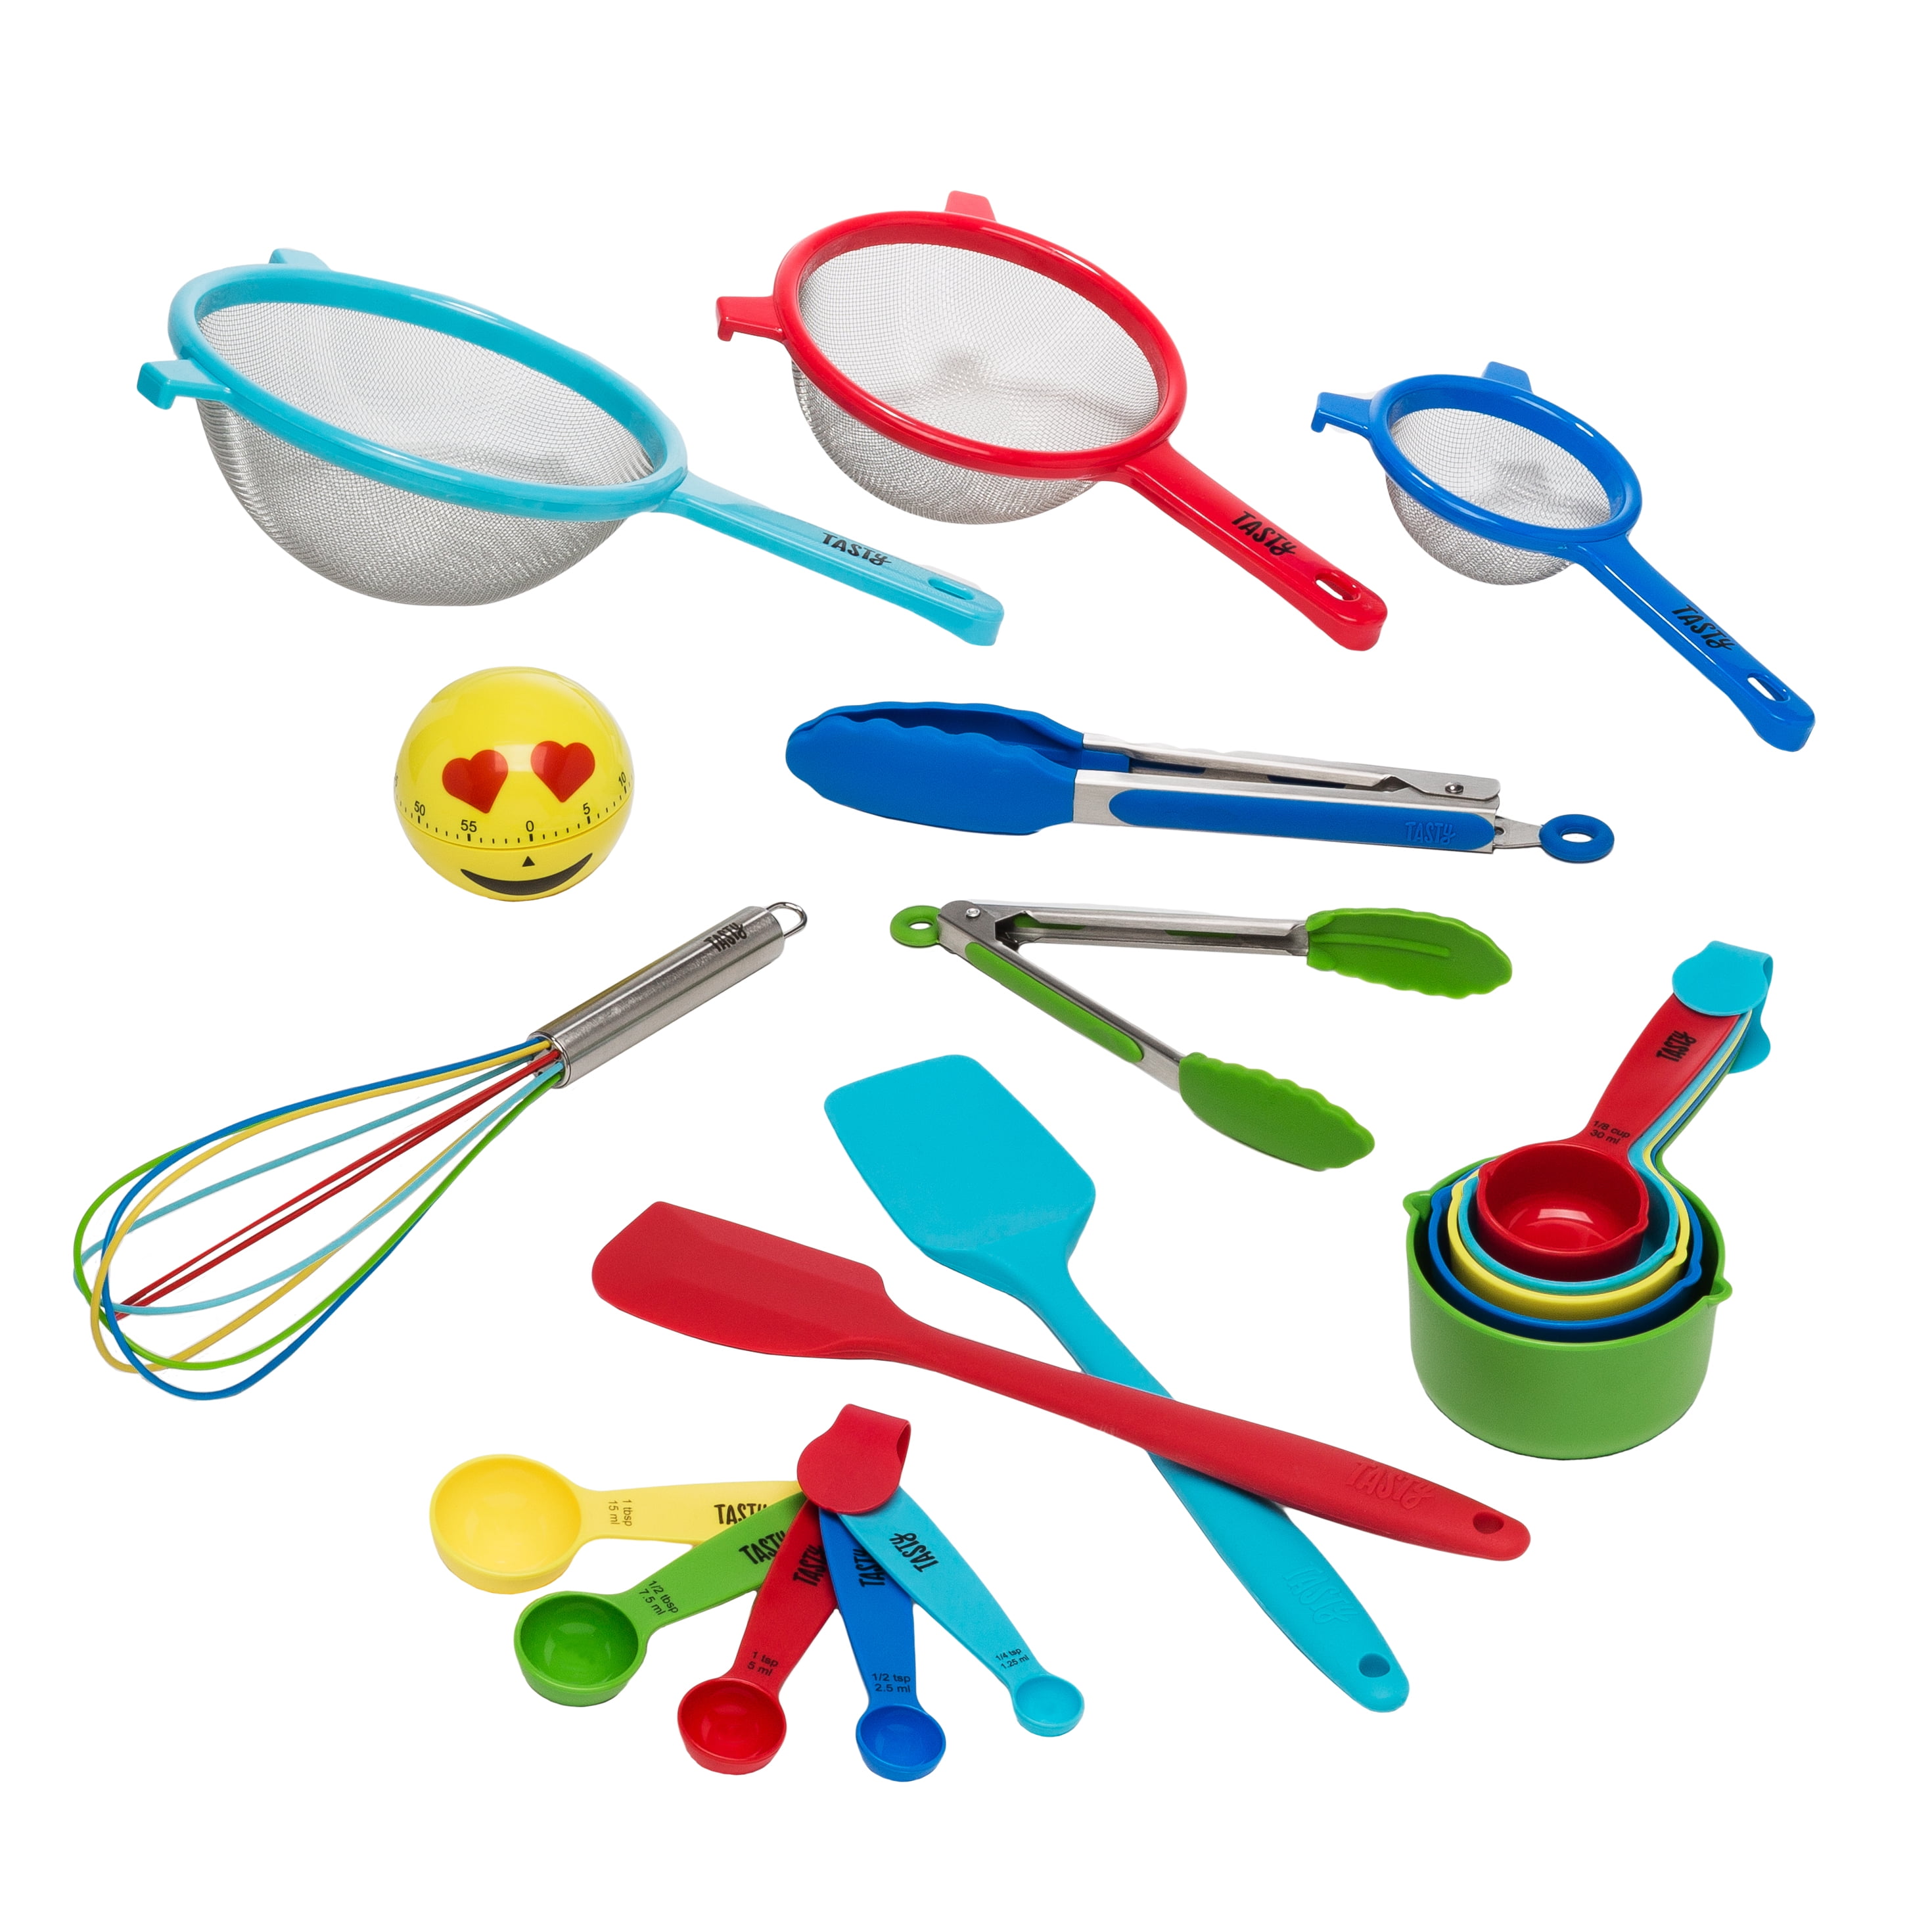 Tasty 2000 Piece Kitchen Utensil and Gadget Set, Items Included Emoji Timer,  Measuring Spoon and Cup Set, 200 Silicone Spatulas, Whisk, 200 Tongs, 20 ...